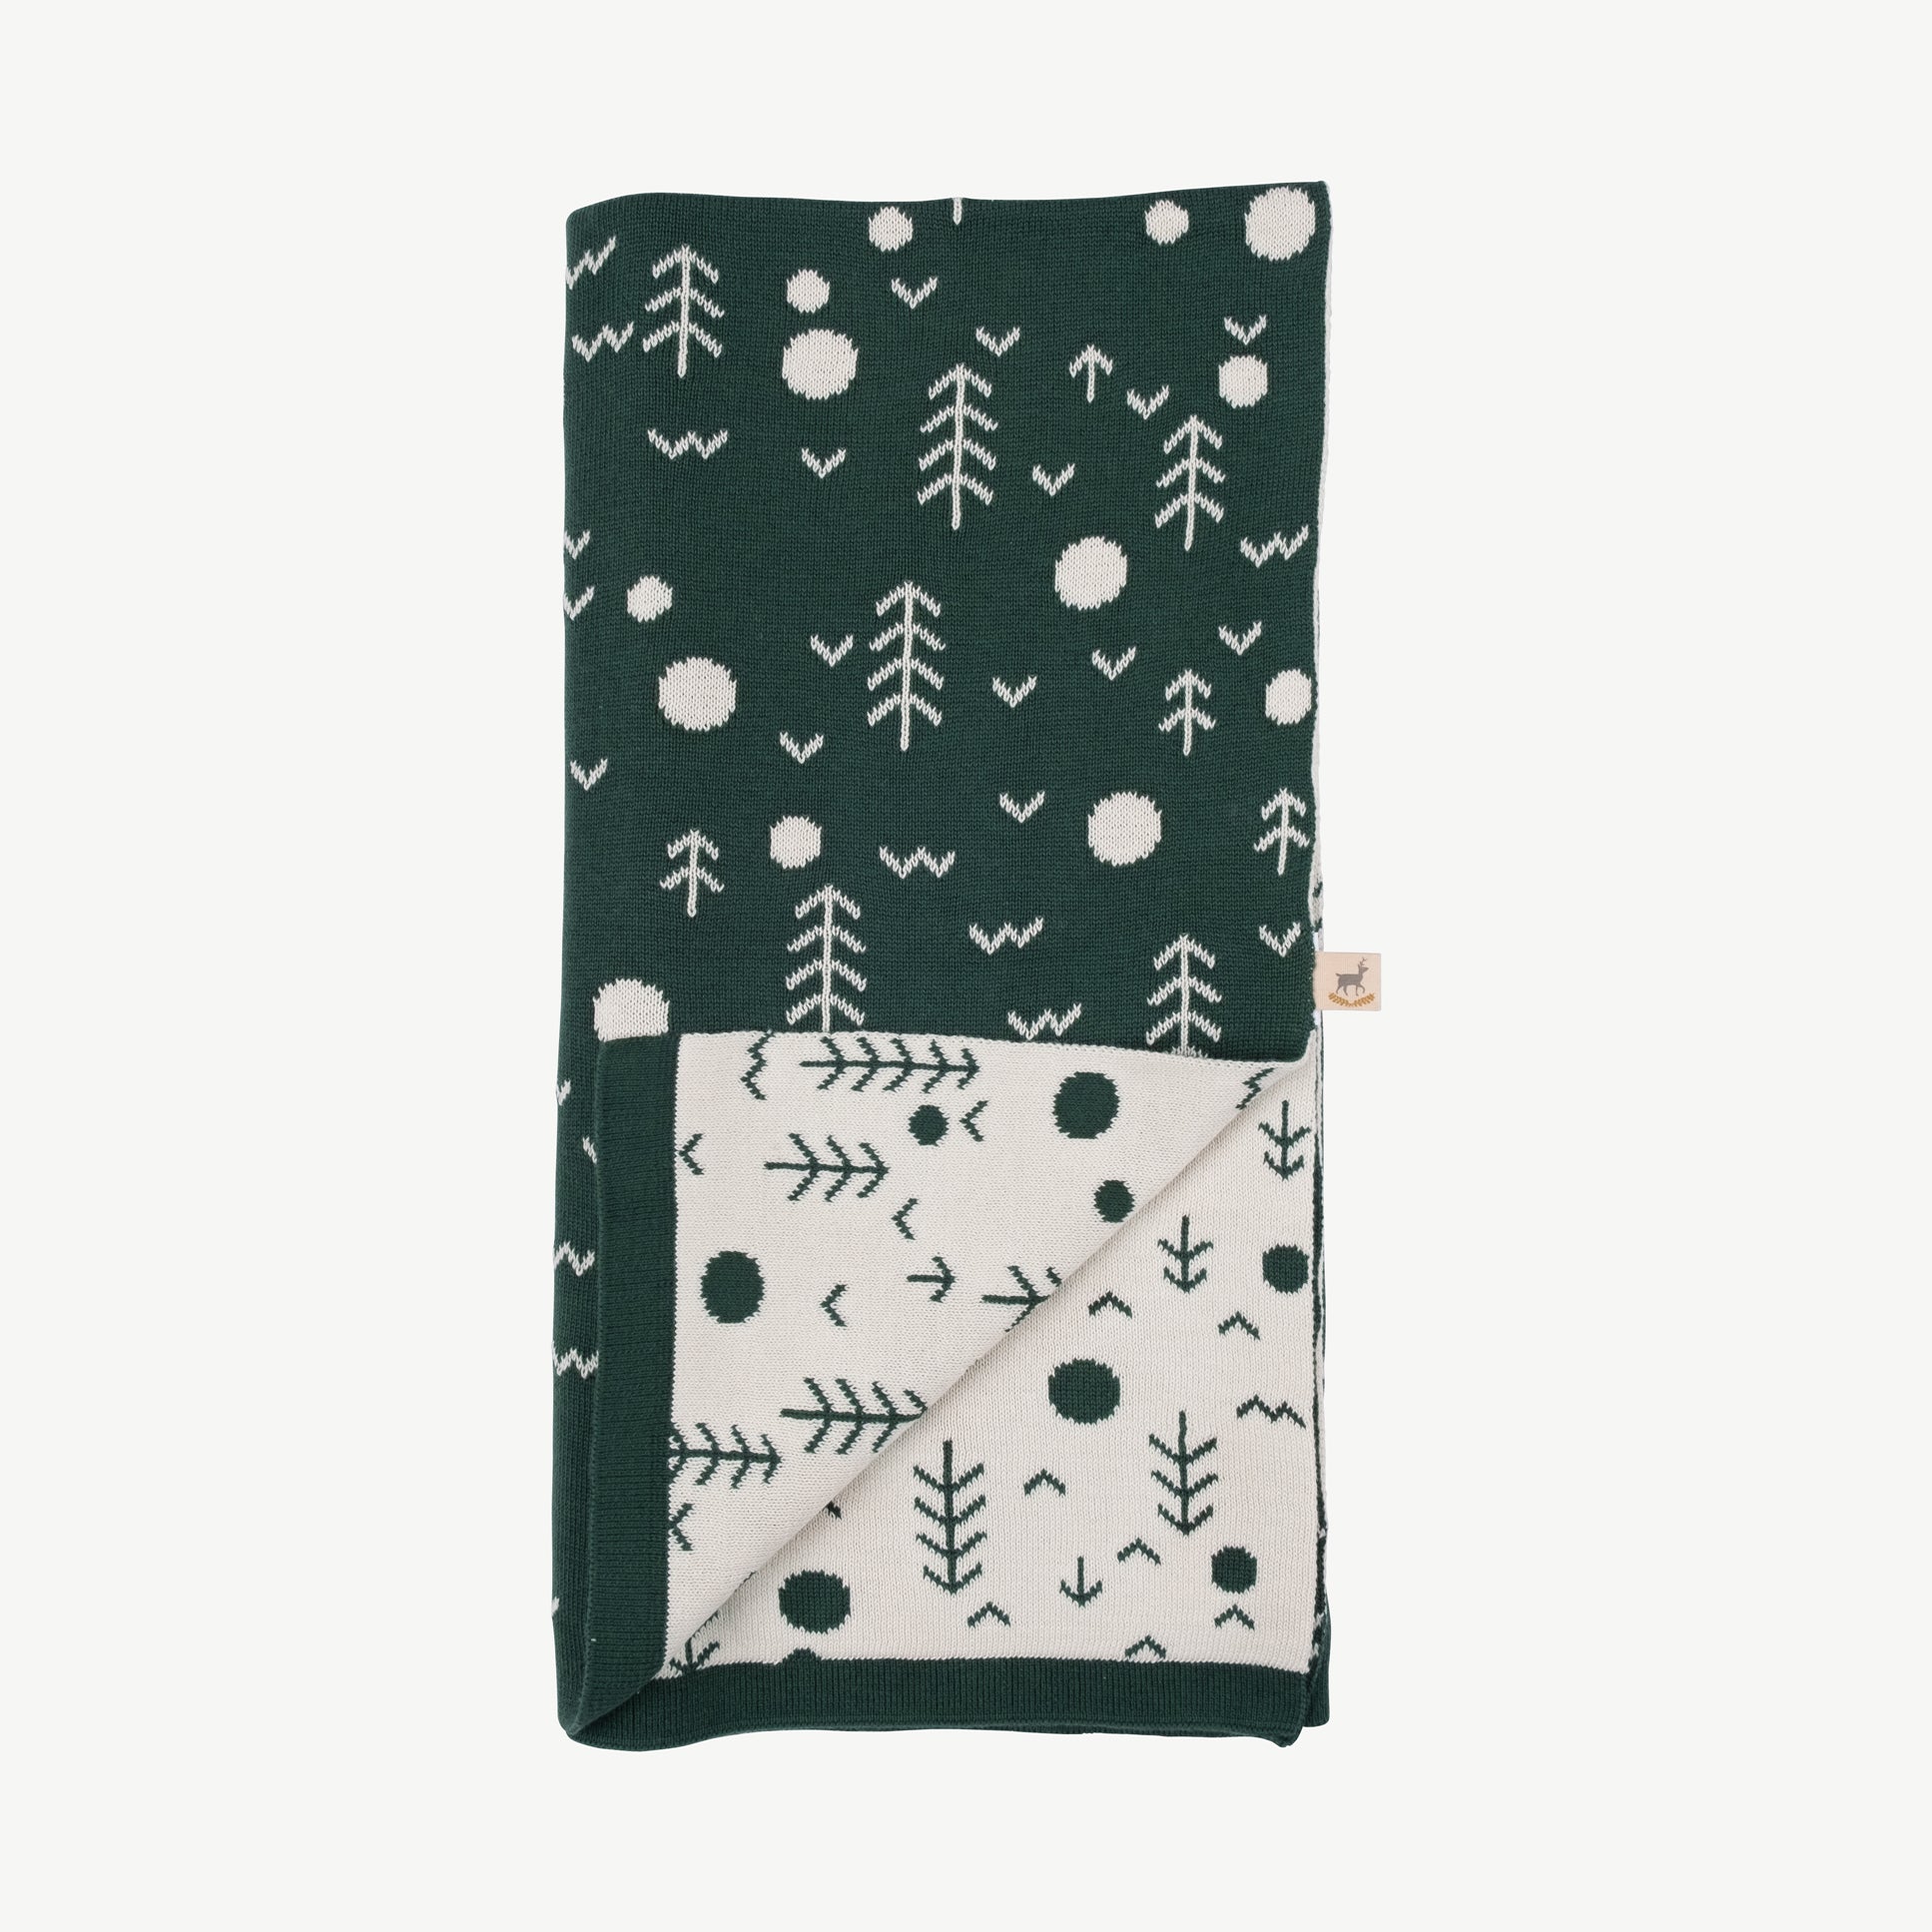 'the woods' forest green knit blanket